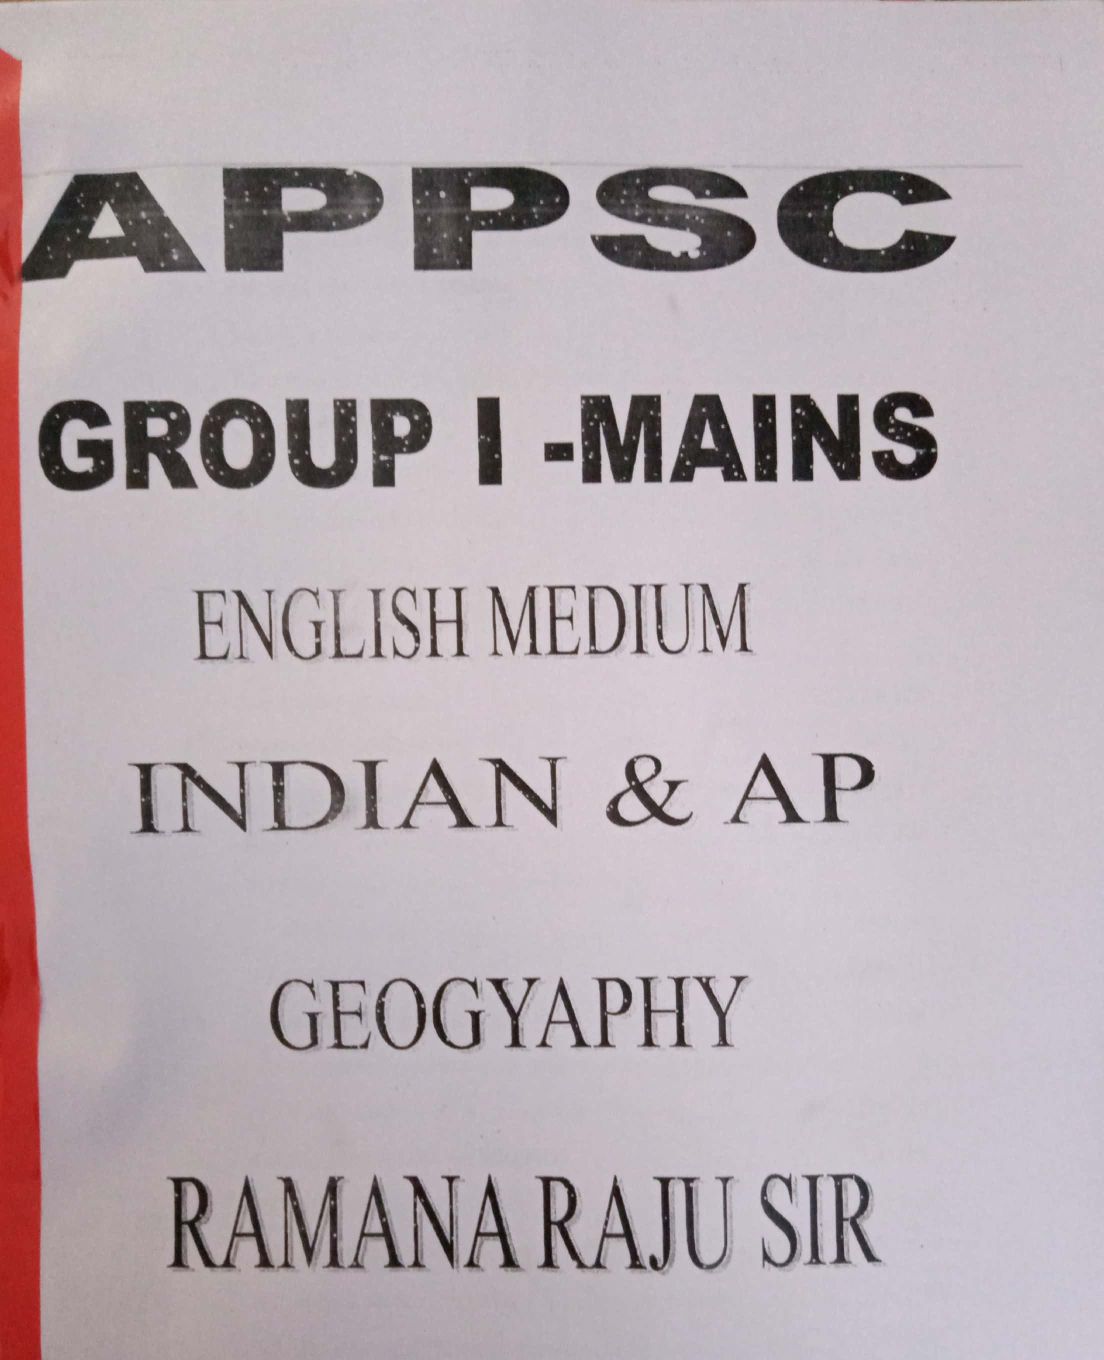 APPSC GROUP-1 MAINS INDIAN & AP GEOGRAPHY XEROX NOTES [ENGLISH MEDIUM]